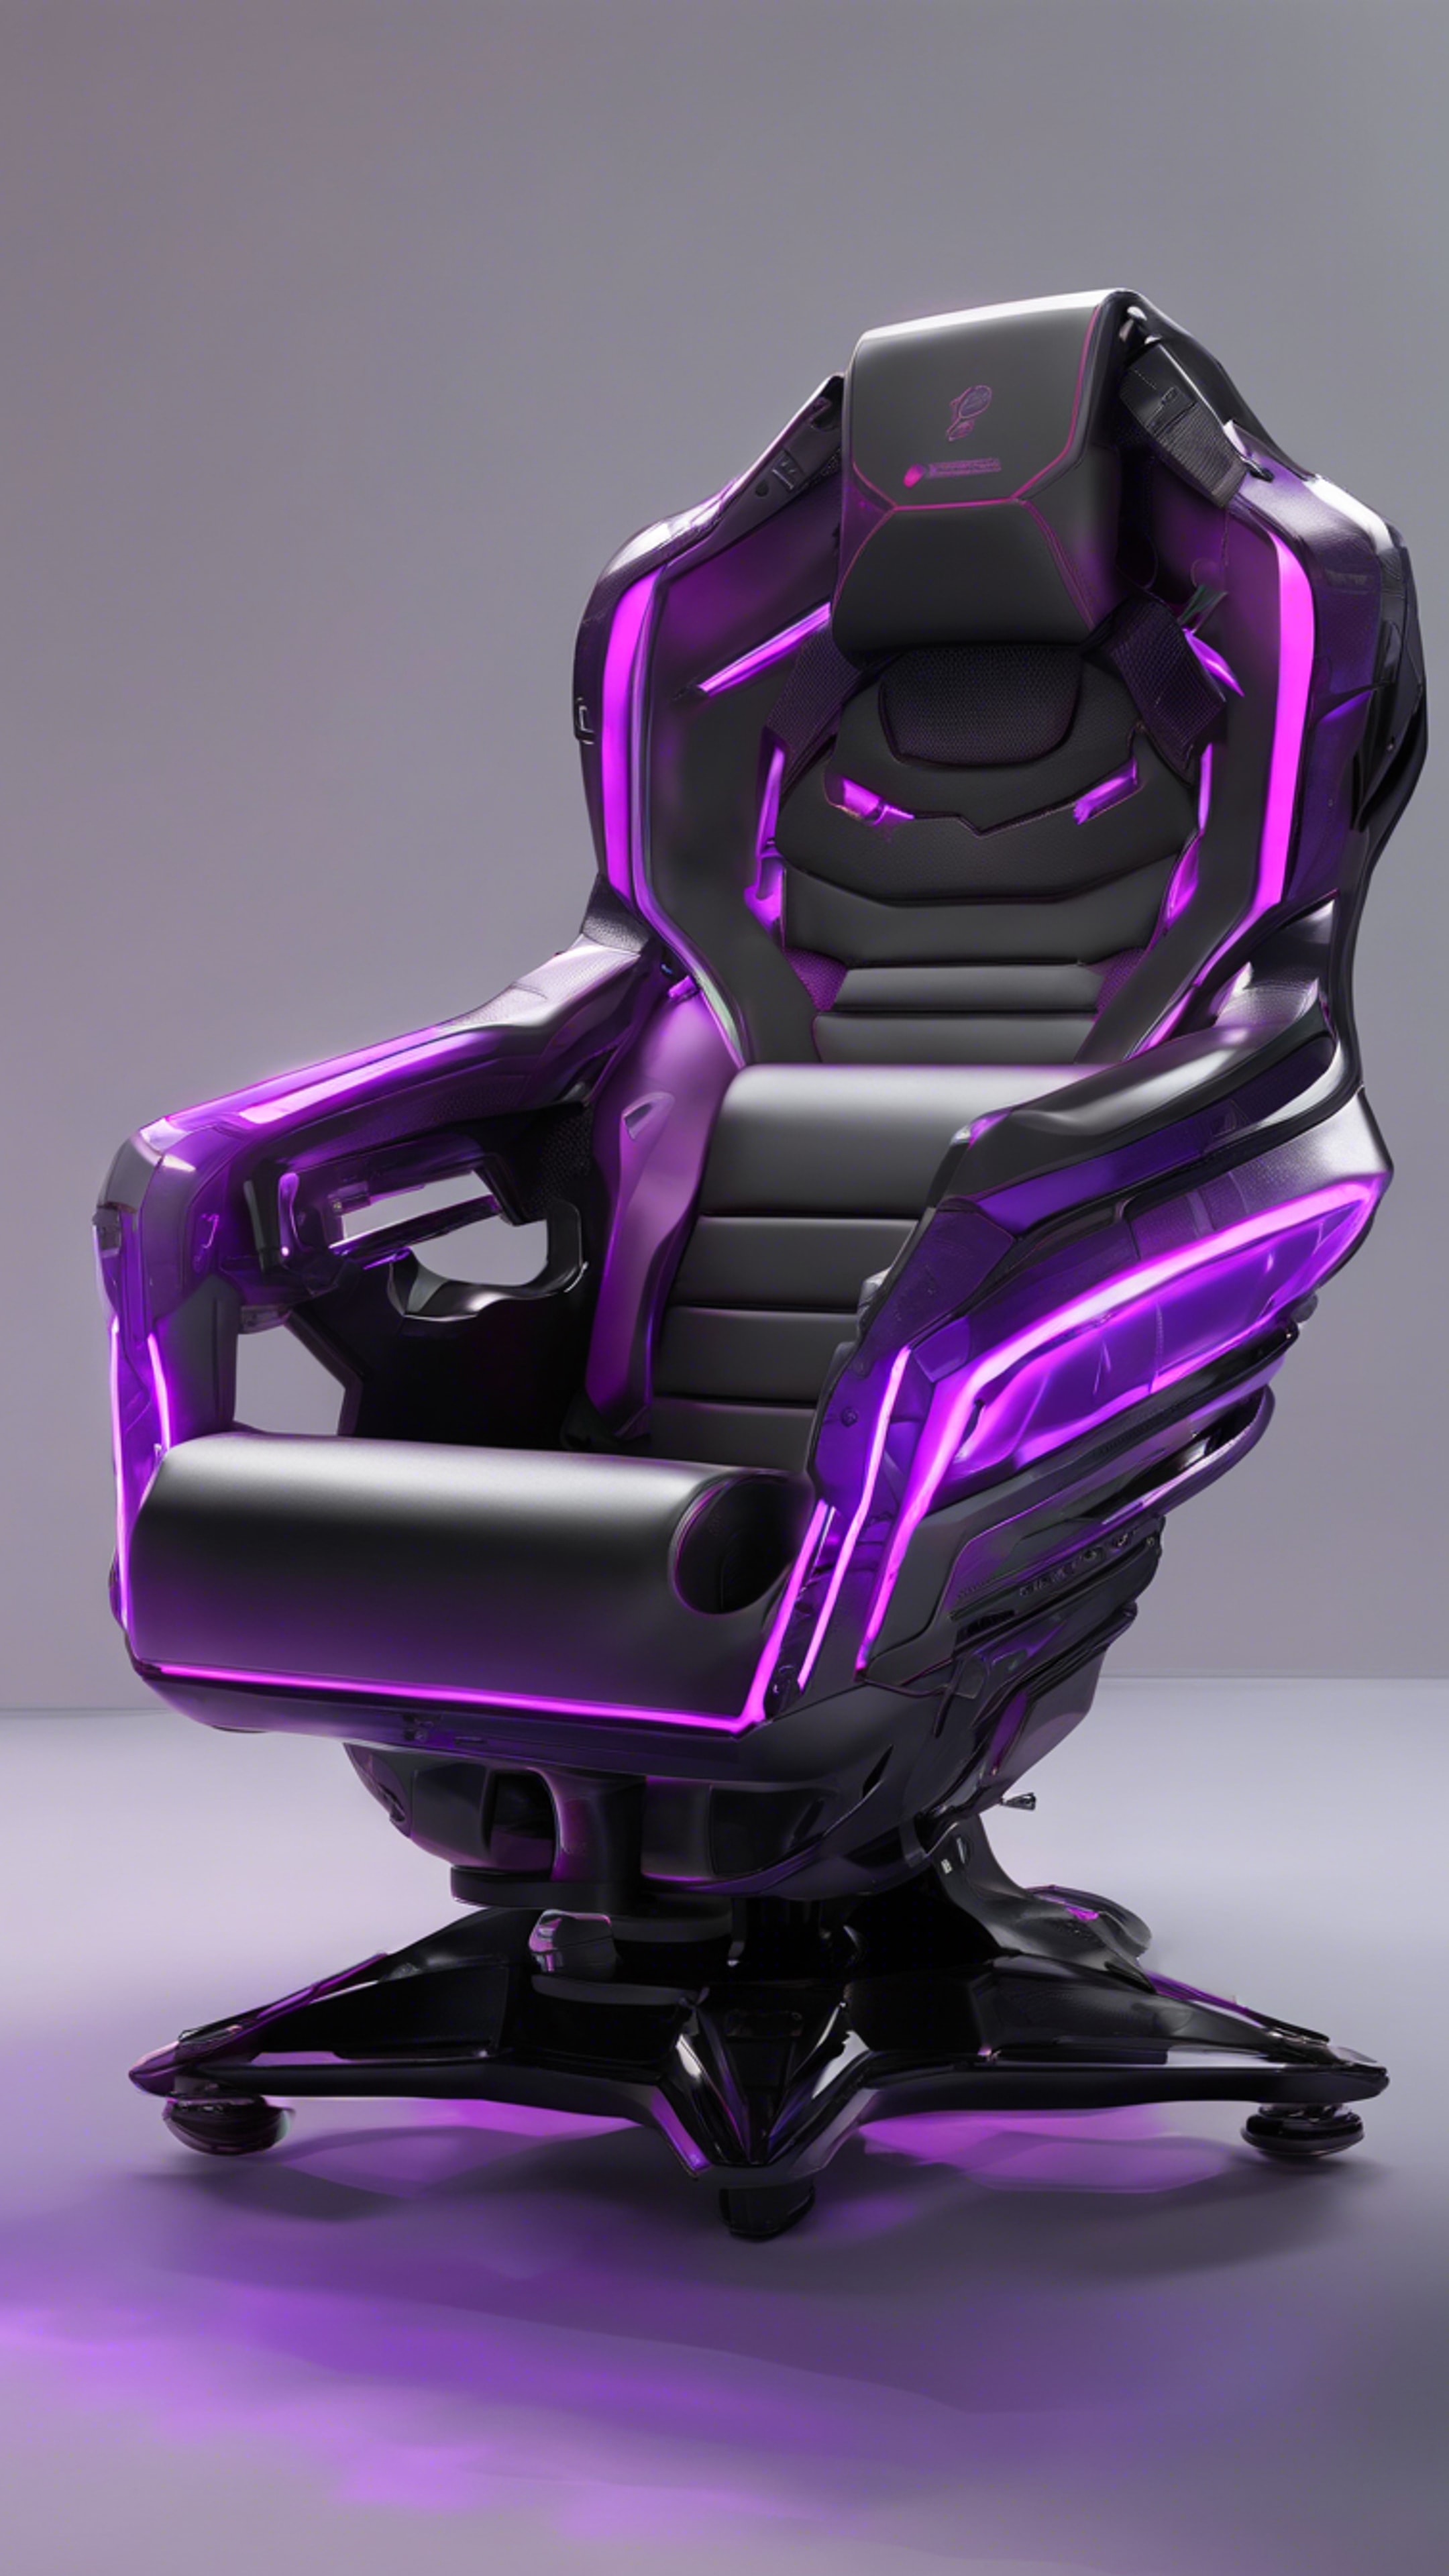 A futuristic gaming chair, jet black with neon purple accents, situated in a high-tech gaming station. Обои[77c4183ef08040e08e97]